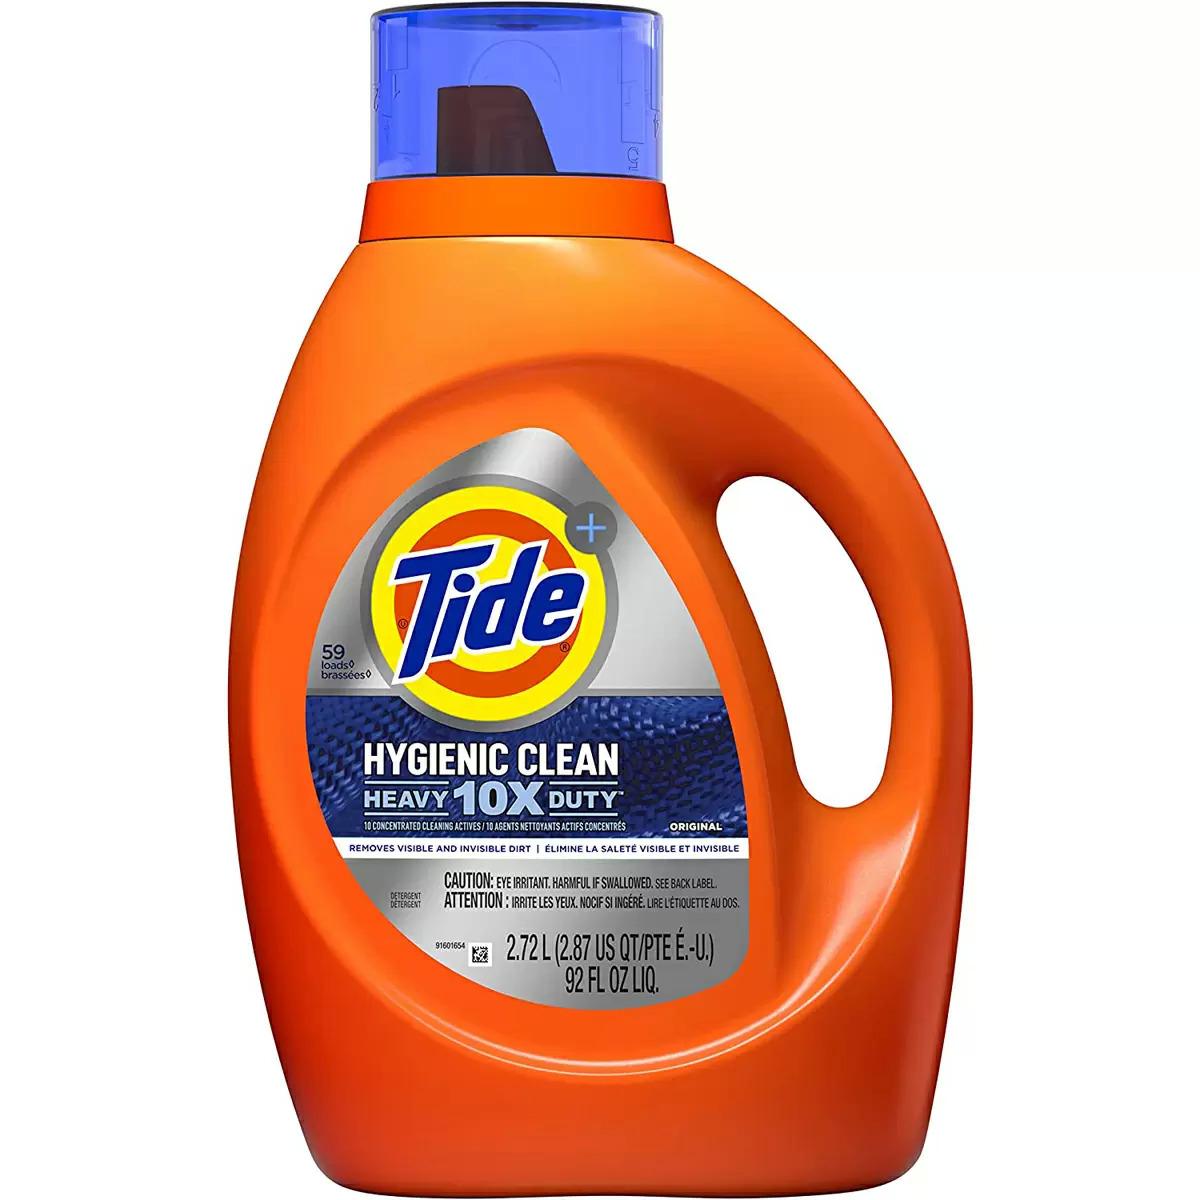 Tide Hygienic Clean Heavy 10x Duty Liquid Laundry Detergent for $9.01 Shipped